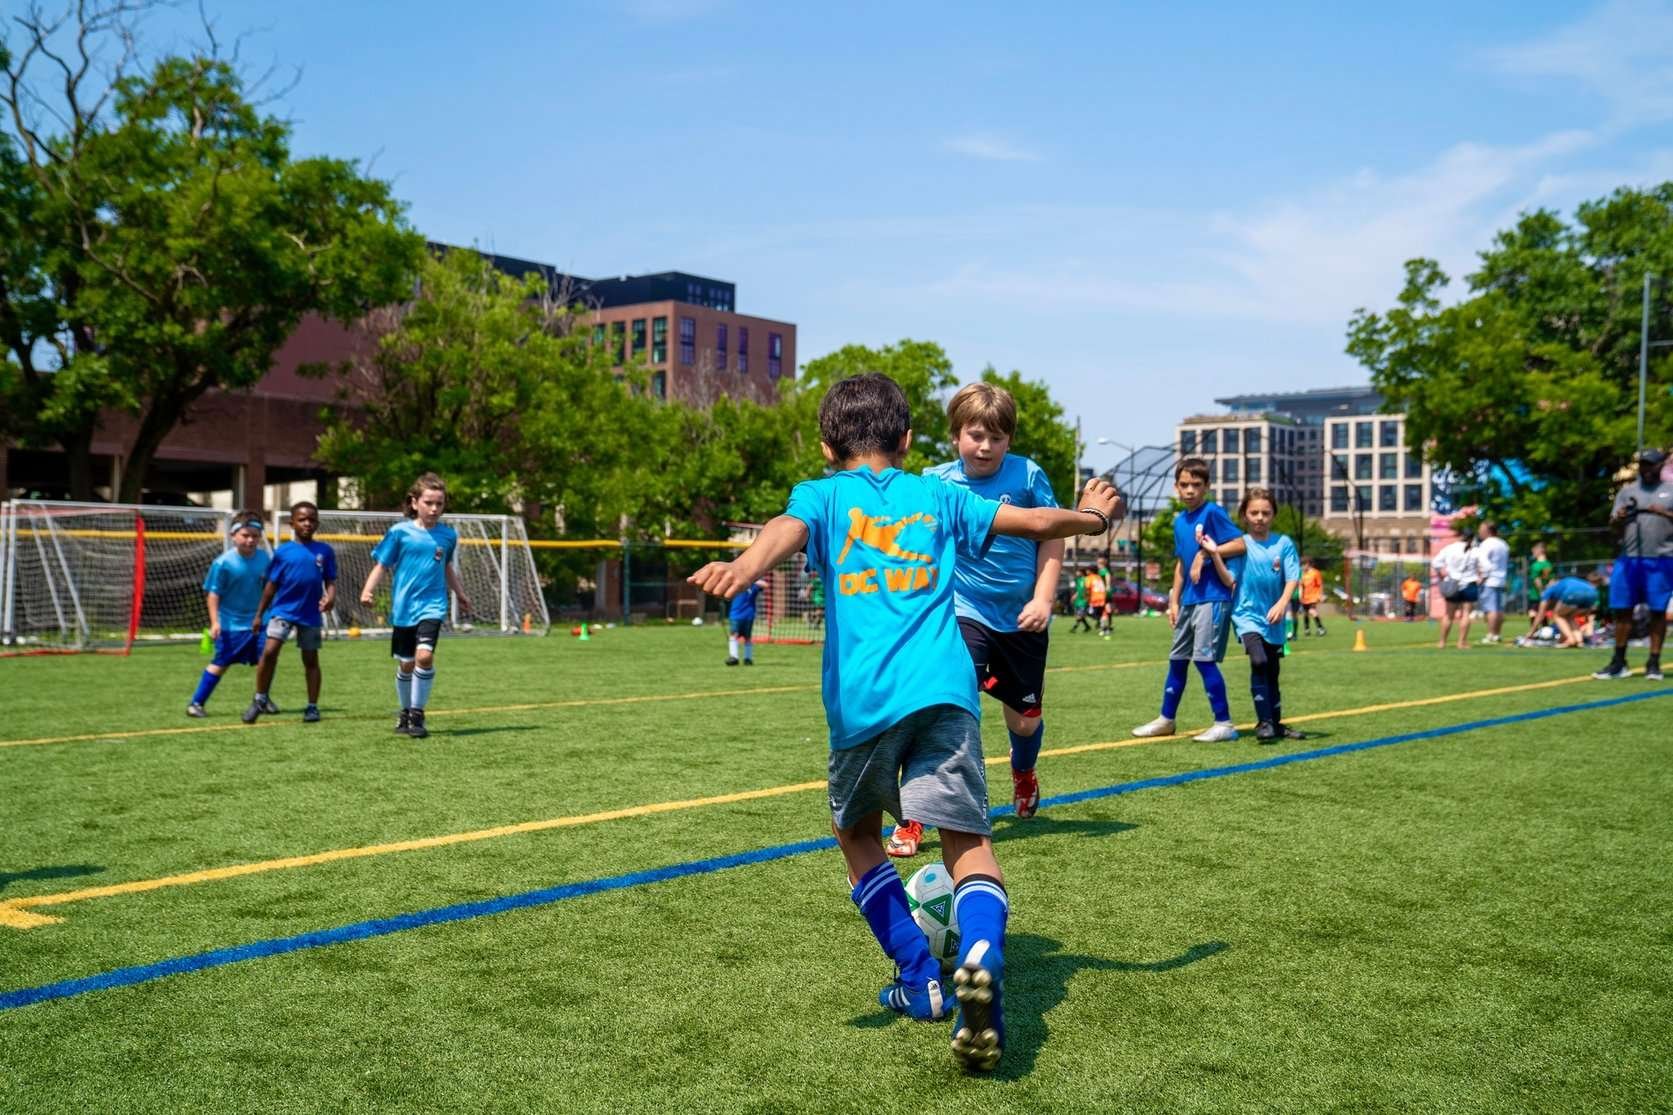 Dc-way-soccer-club-for-kids-in-washington-dc-capitol-hill-league-at-brentwood-hamilton-park-06-03-2023 0121.jpg